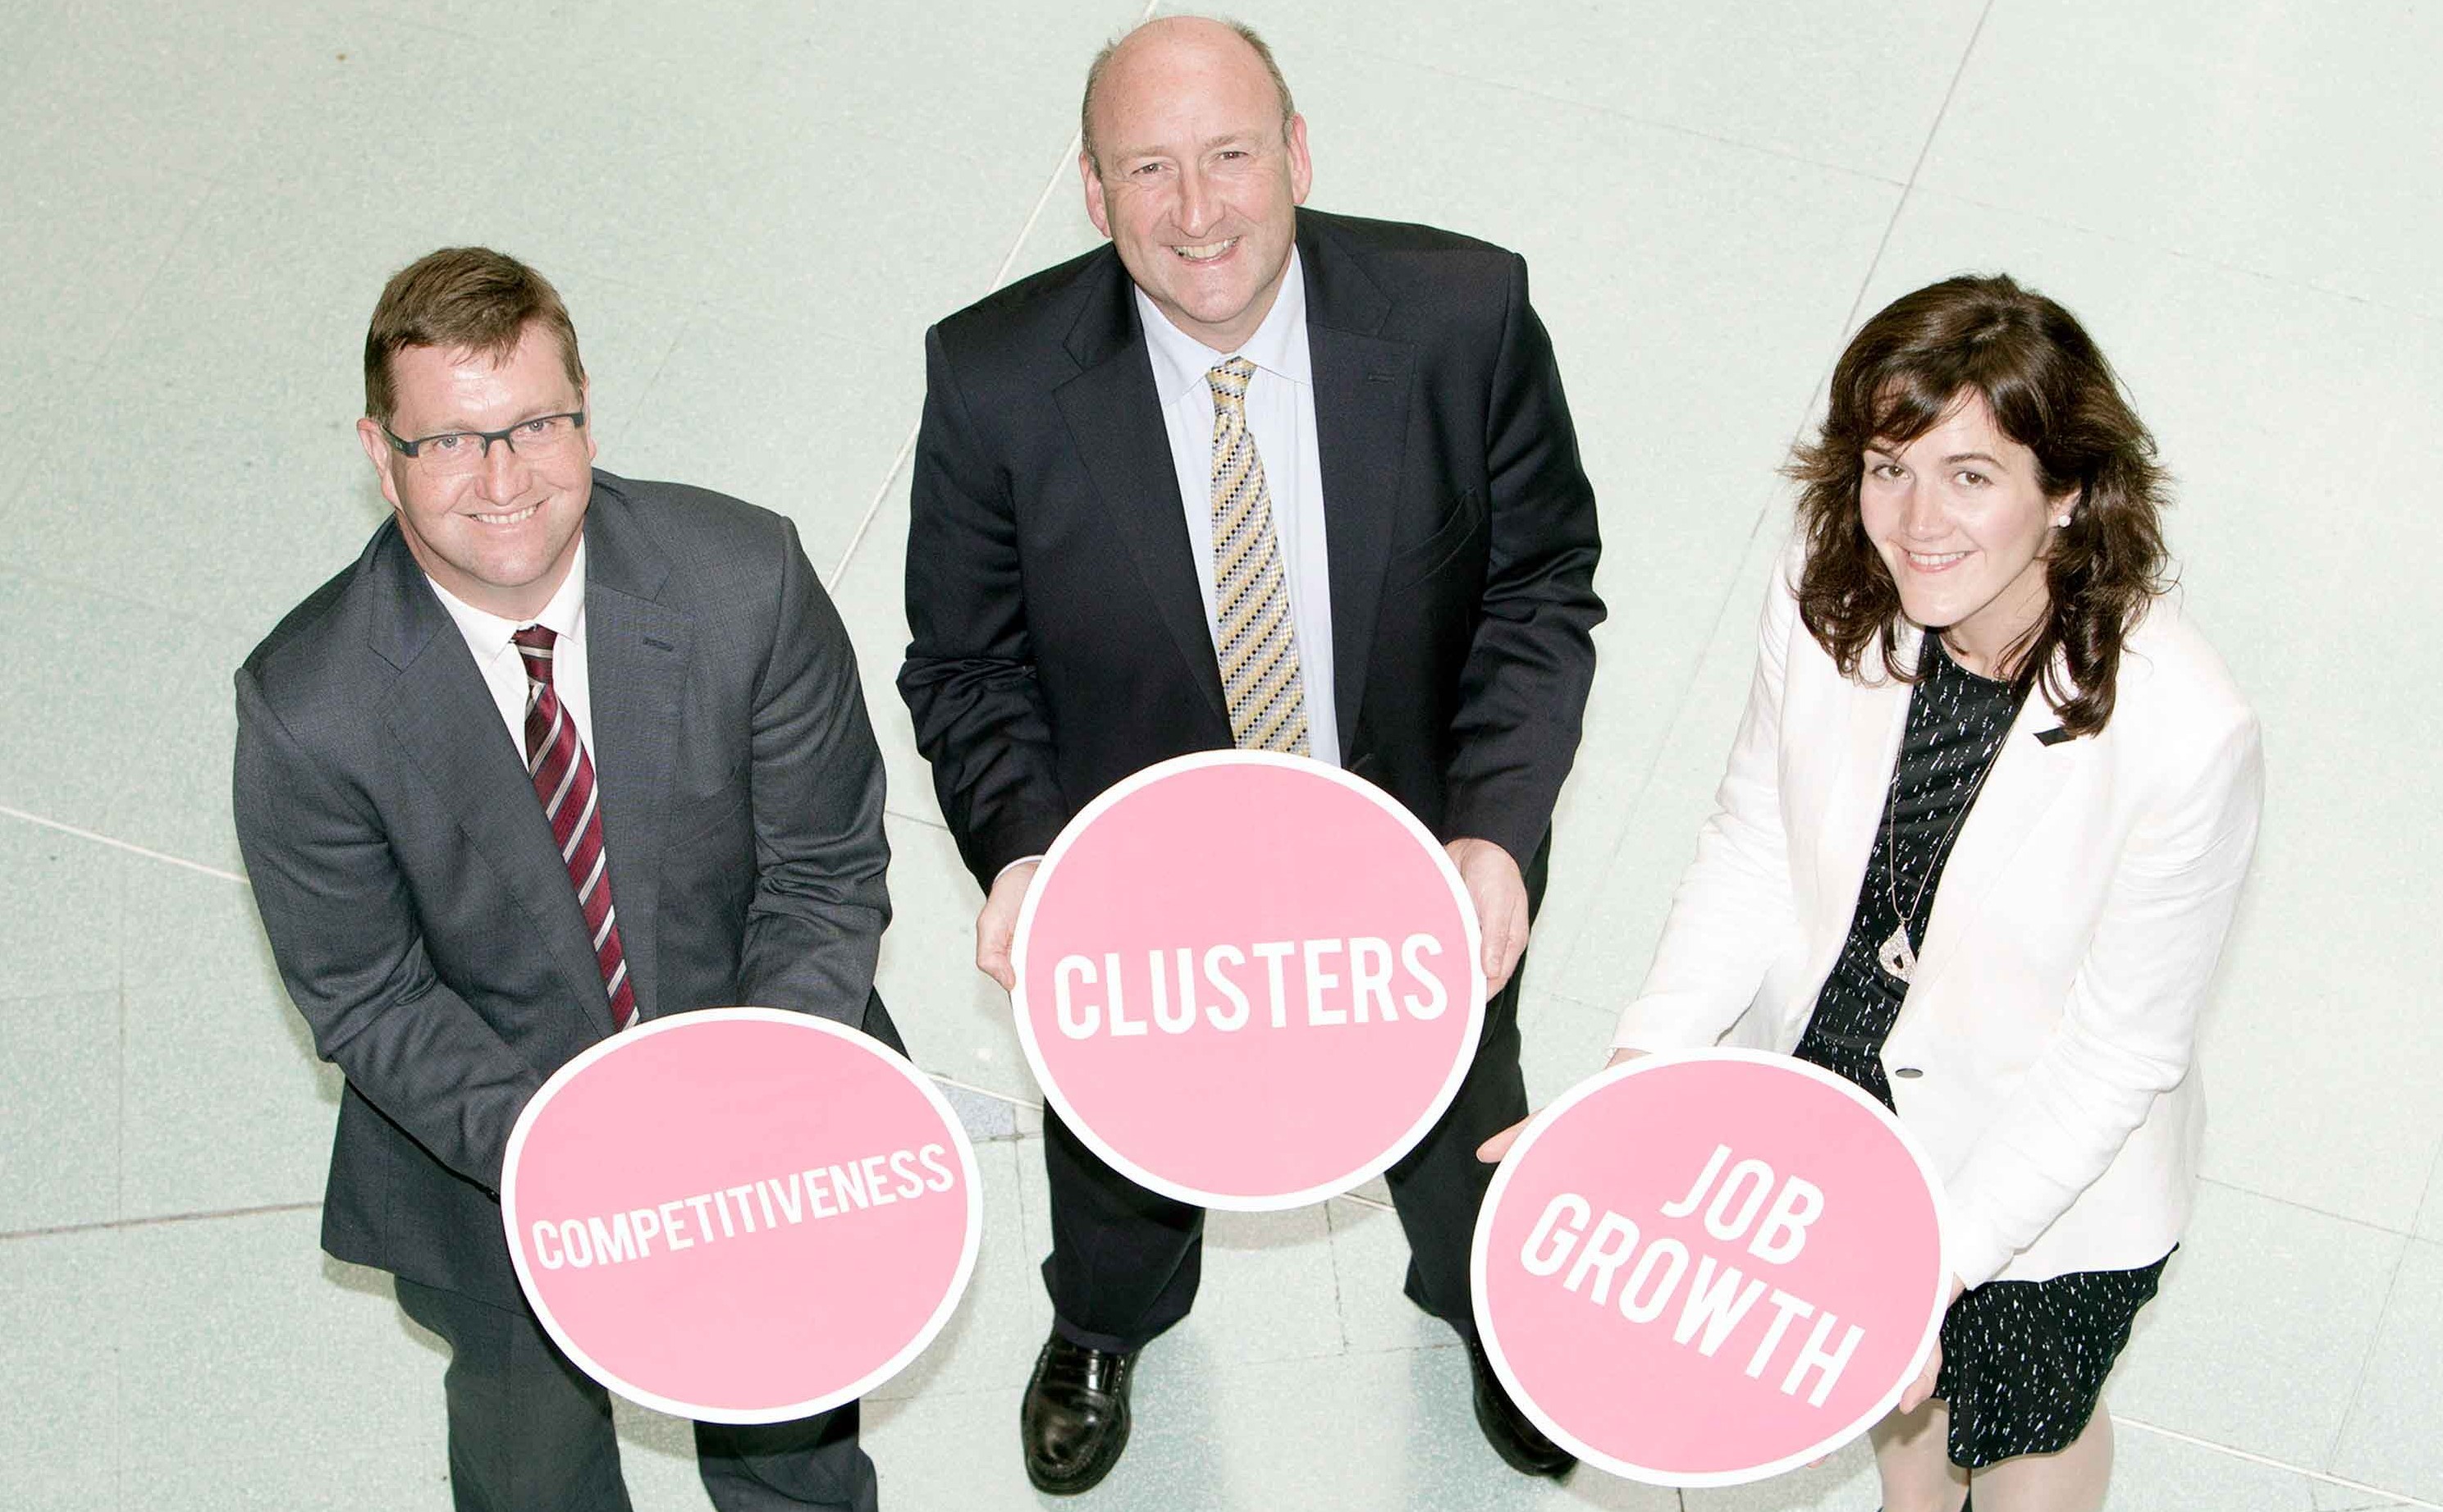 The National Sports Business Cluster is to be established in Limerick